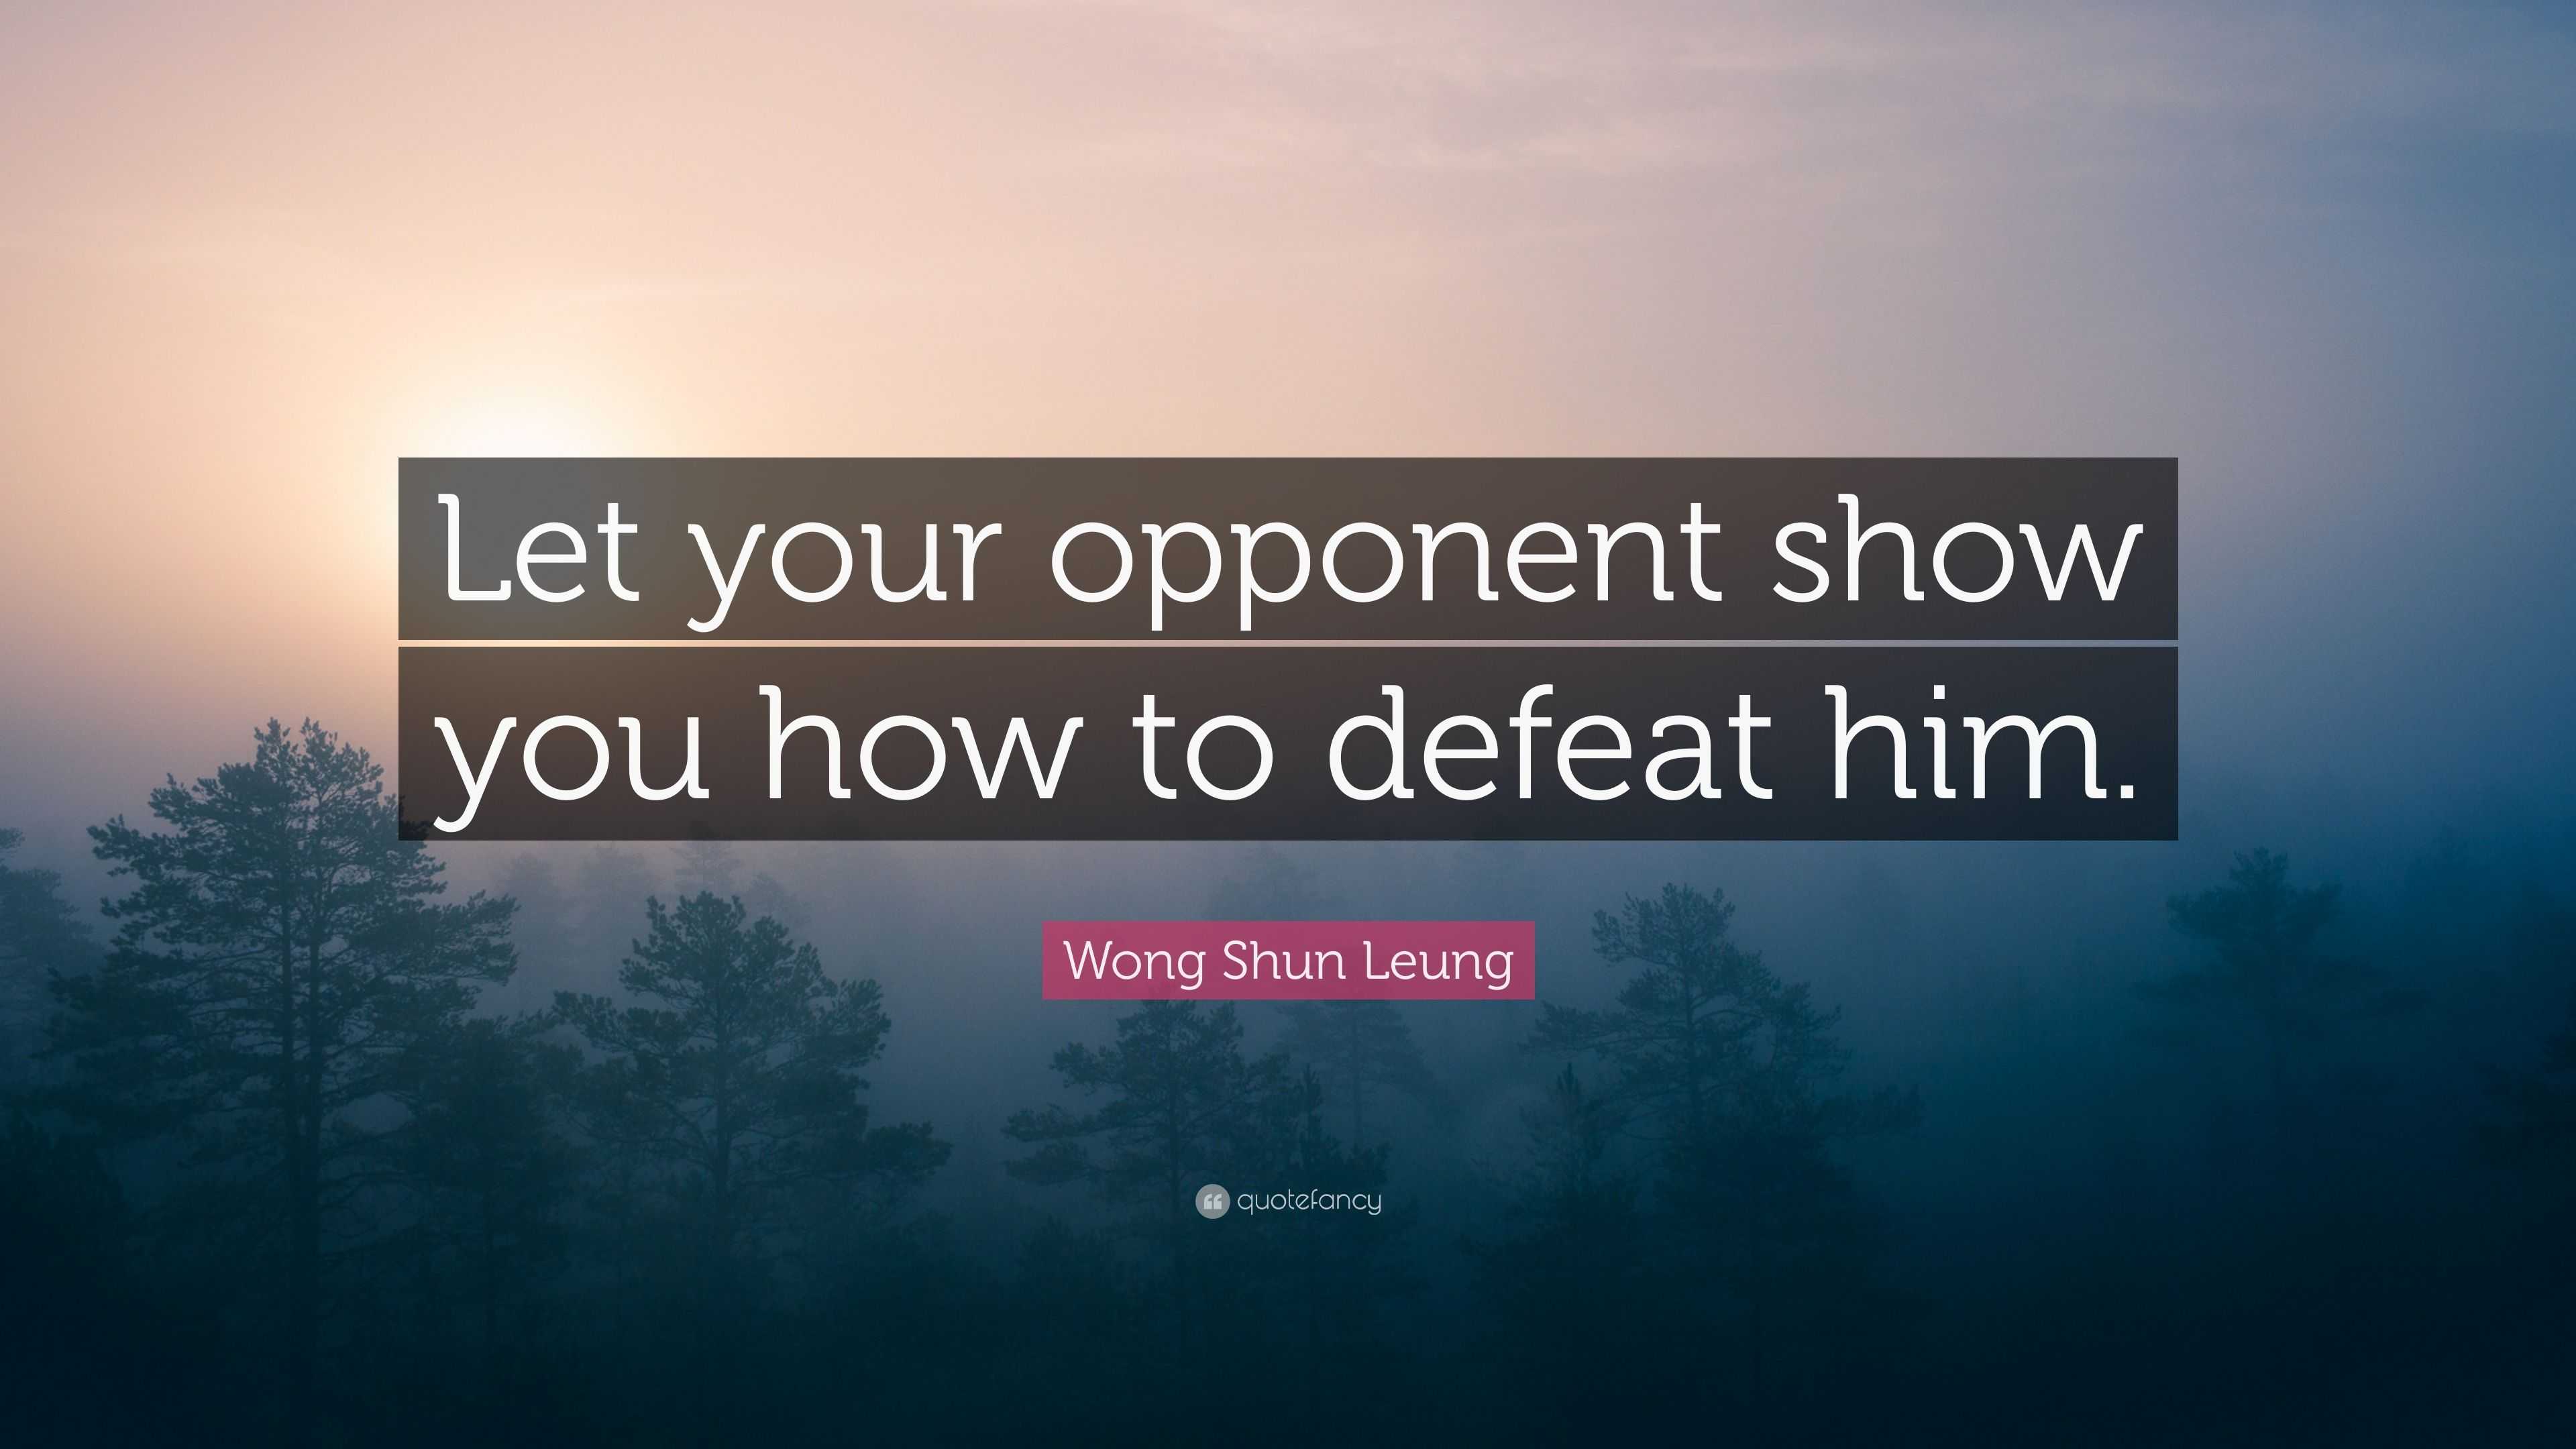 Wong Shun Leung Quote: Let your opponent show you how to defeat him